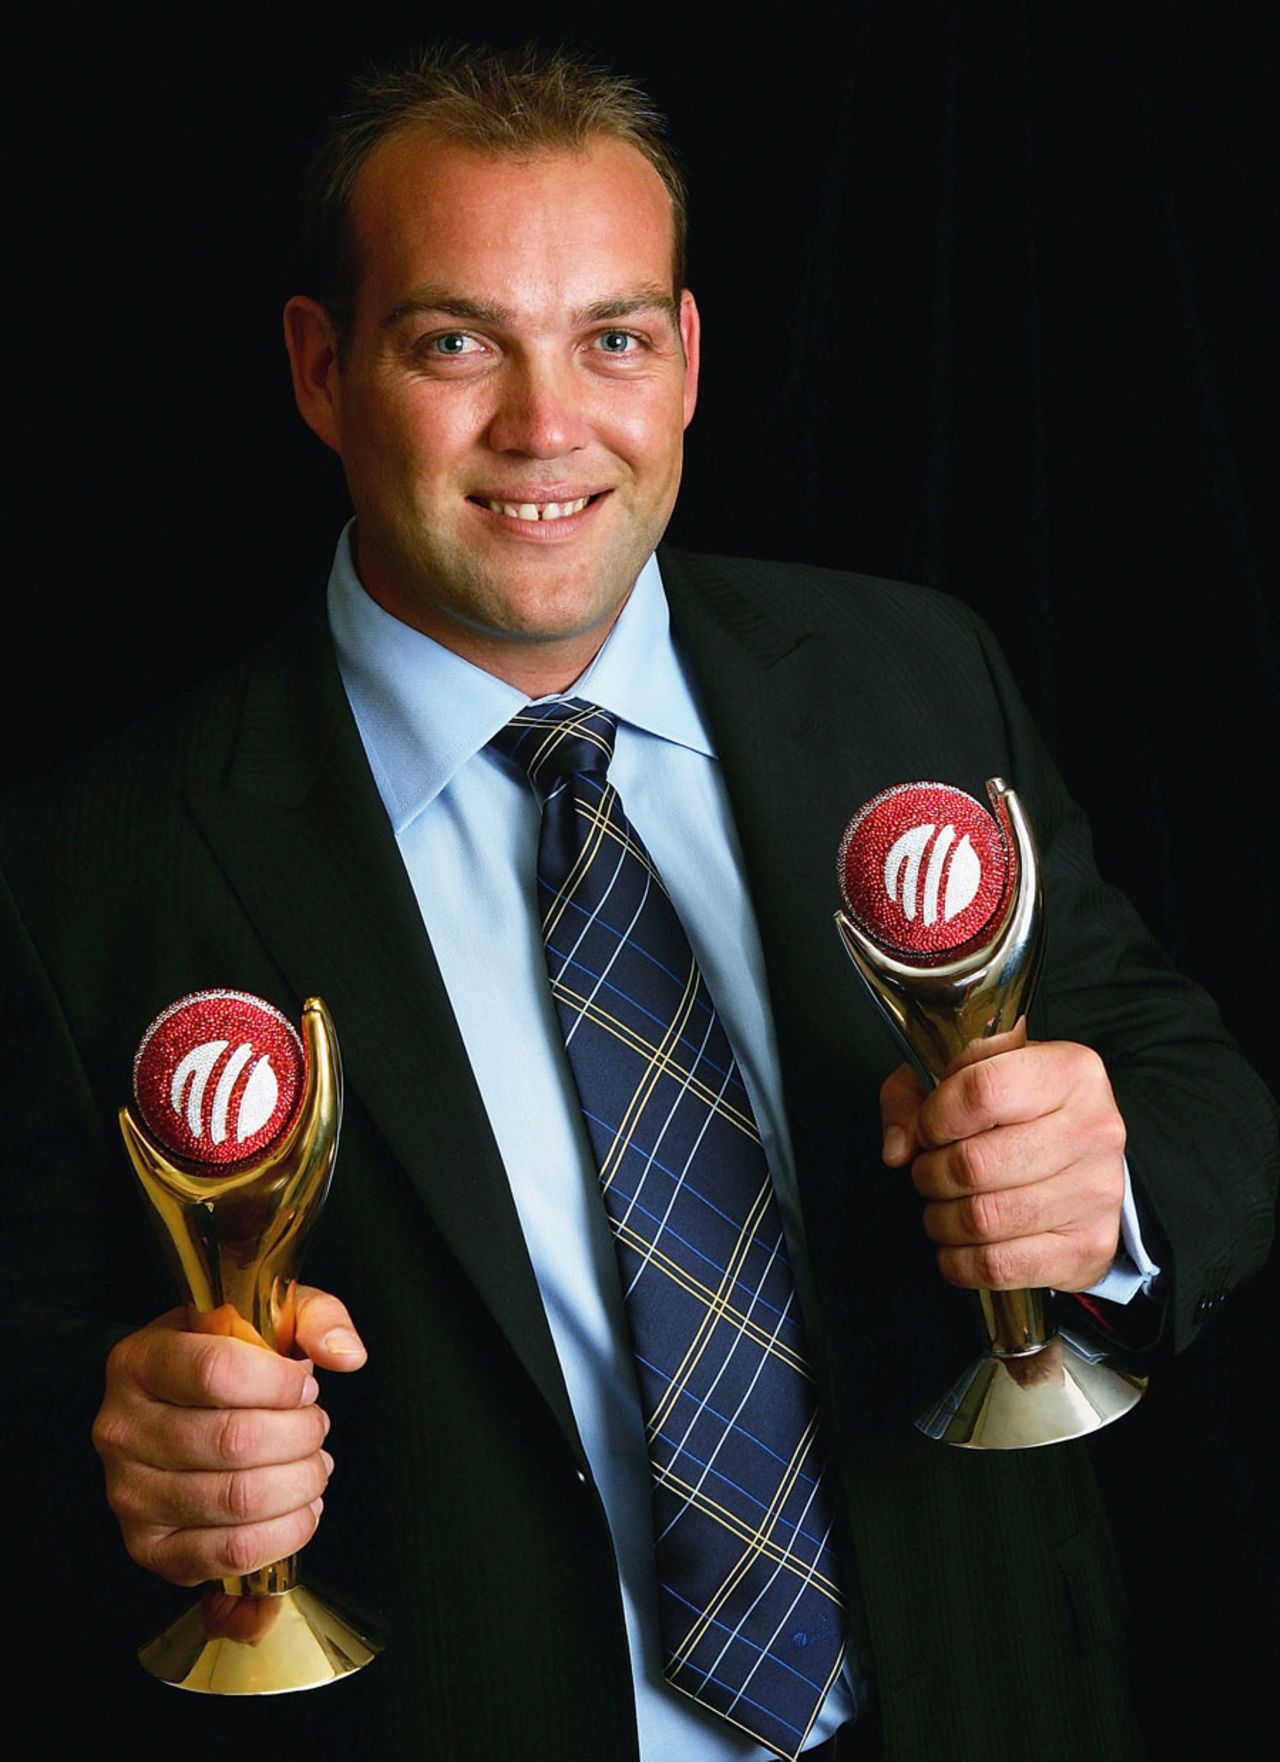 Jacques Kallis poses with the Sir Garfield Sobers Trophy and the Test Player of the Year Trophy, Sydney, October 11, 2005 